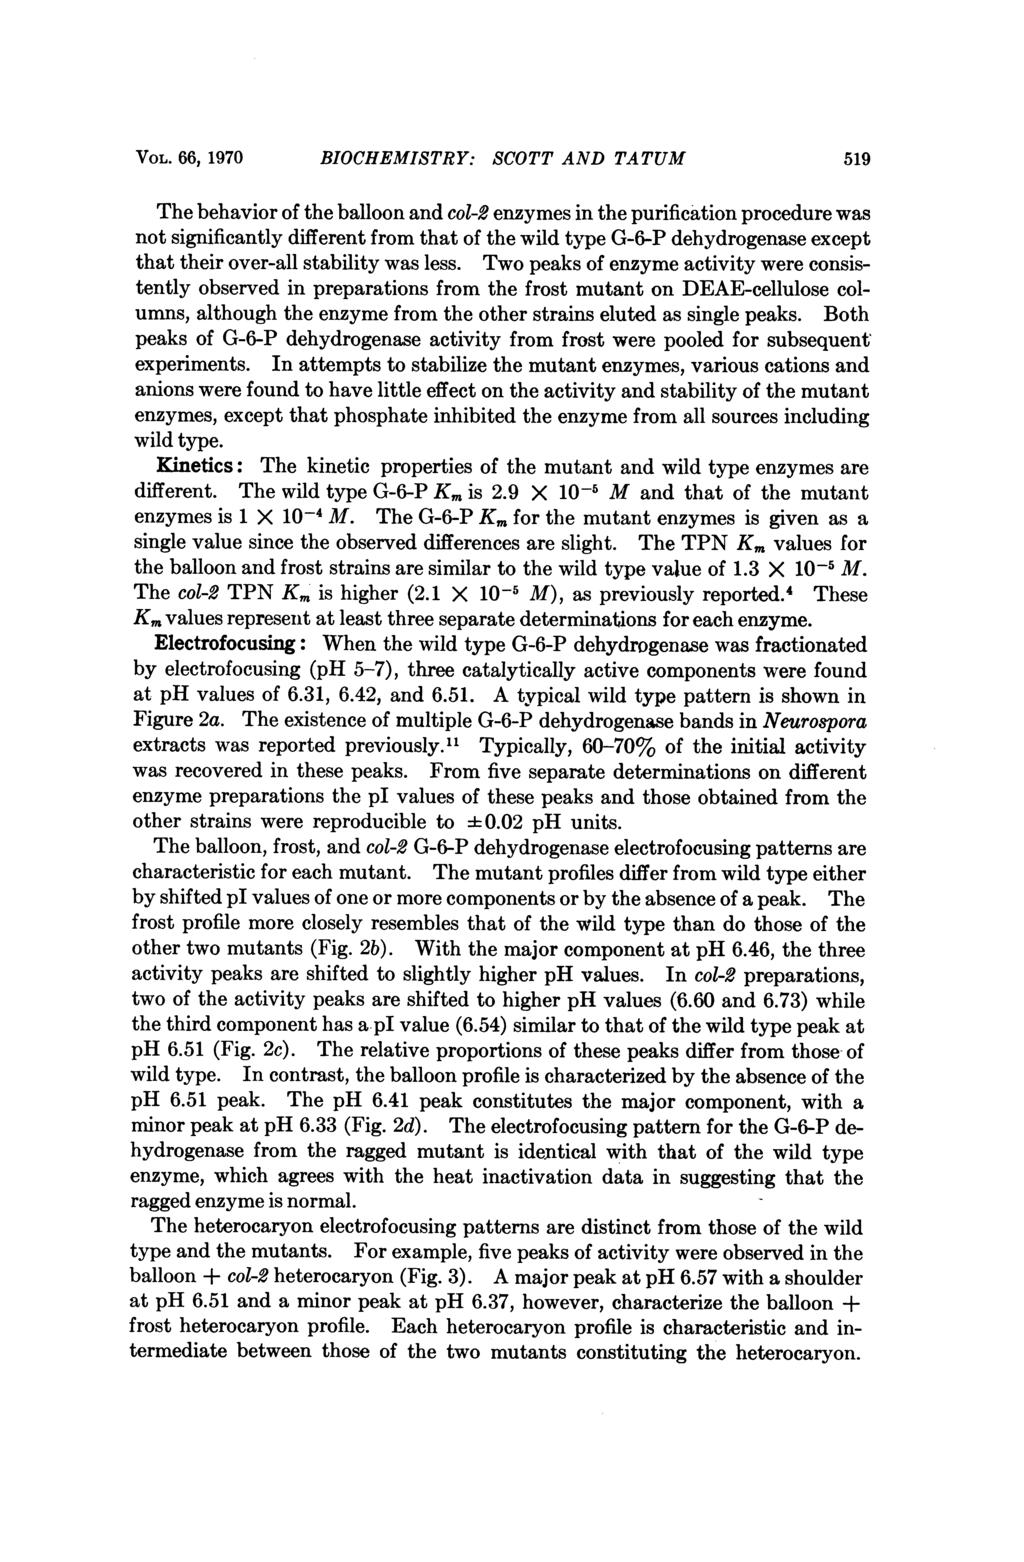 VOL. 66, 1970 BIOCHEMISTRY: SCOTT AND TATUM 519 The behavior of the balloon and col-2 enzymes in the purification procedure was not significantly different from that of the wild type G-6-P